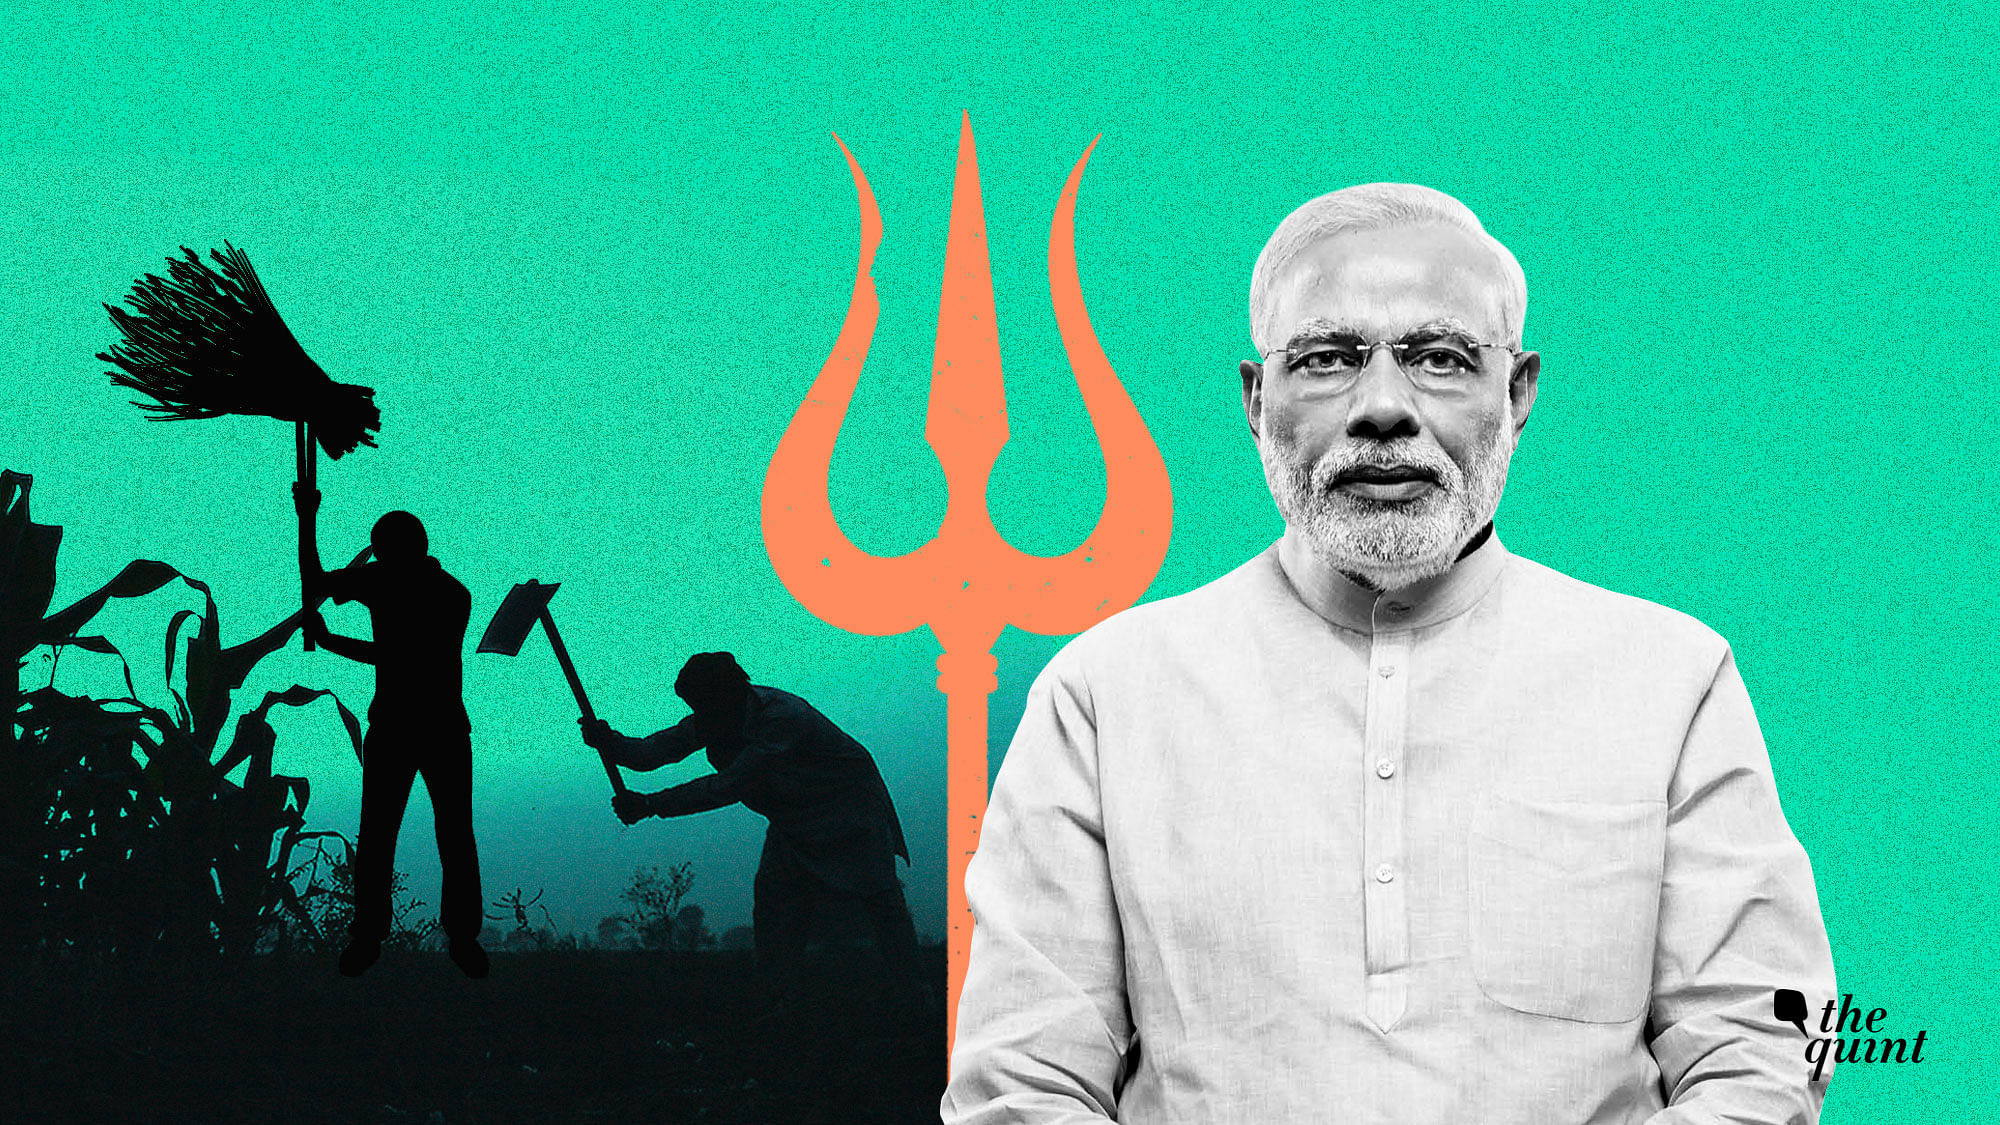 The RSS observes that “the real challenge for the BJP is how to present development and Hindutva as complementary to each other under the leadership of Modi.”